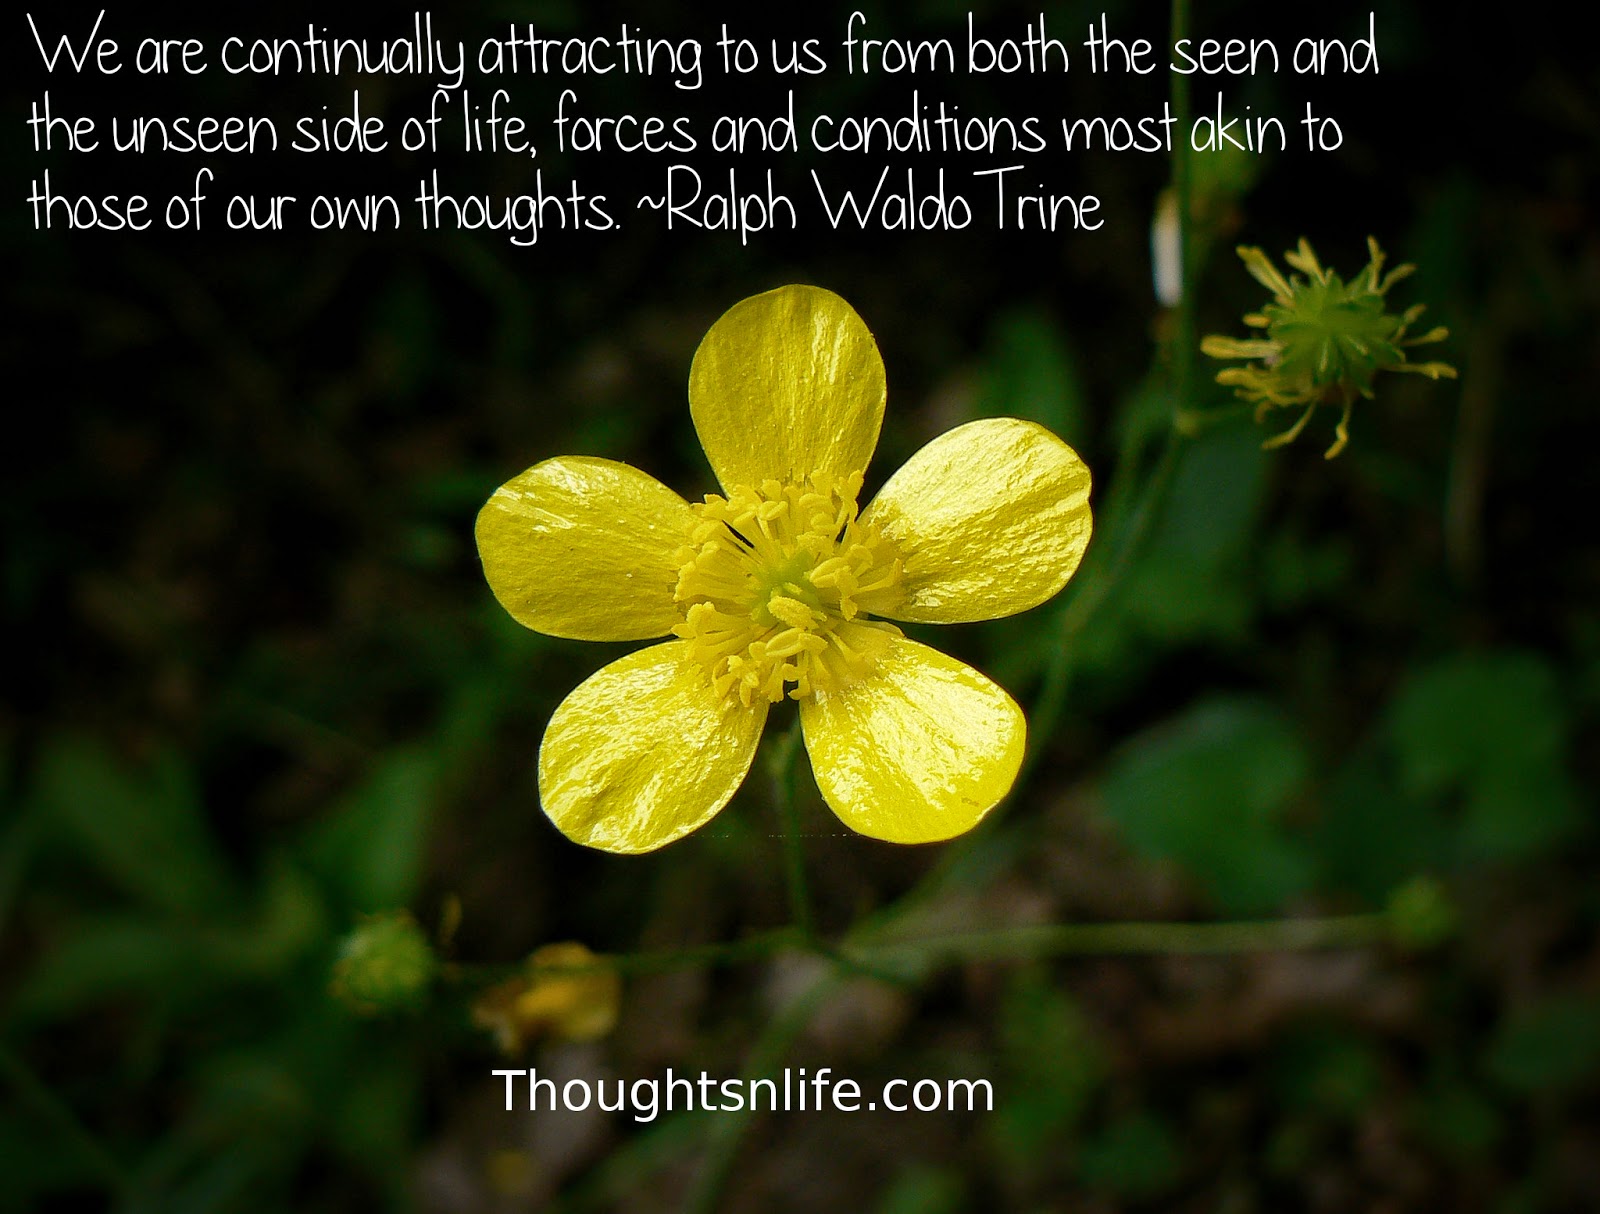 Thoughtsnlife.com: We are continually attracting to us from both the seen and the unseen side of life, forces and conditions most akin to those of our own thoughts. Ralph Waldo Trine